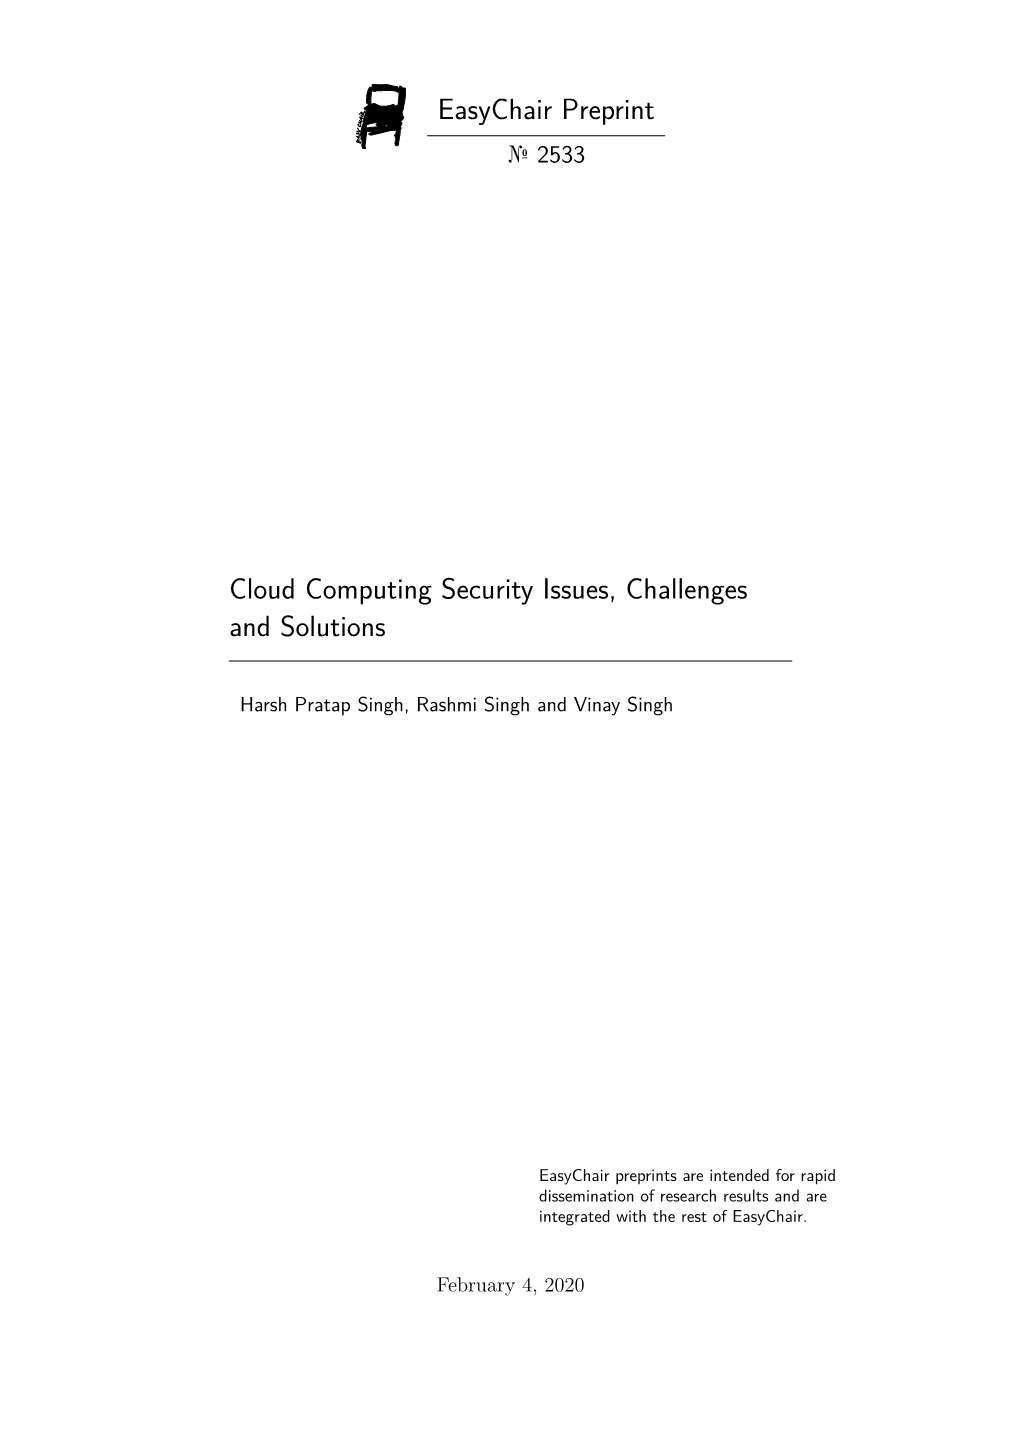 Cloud Computing Security Issues, Challenges and Solutions